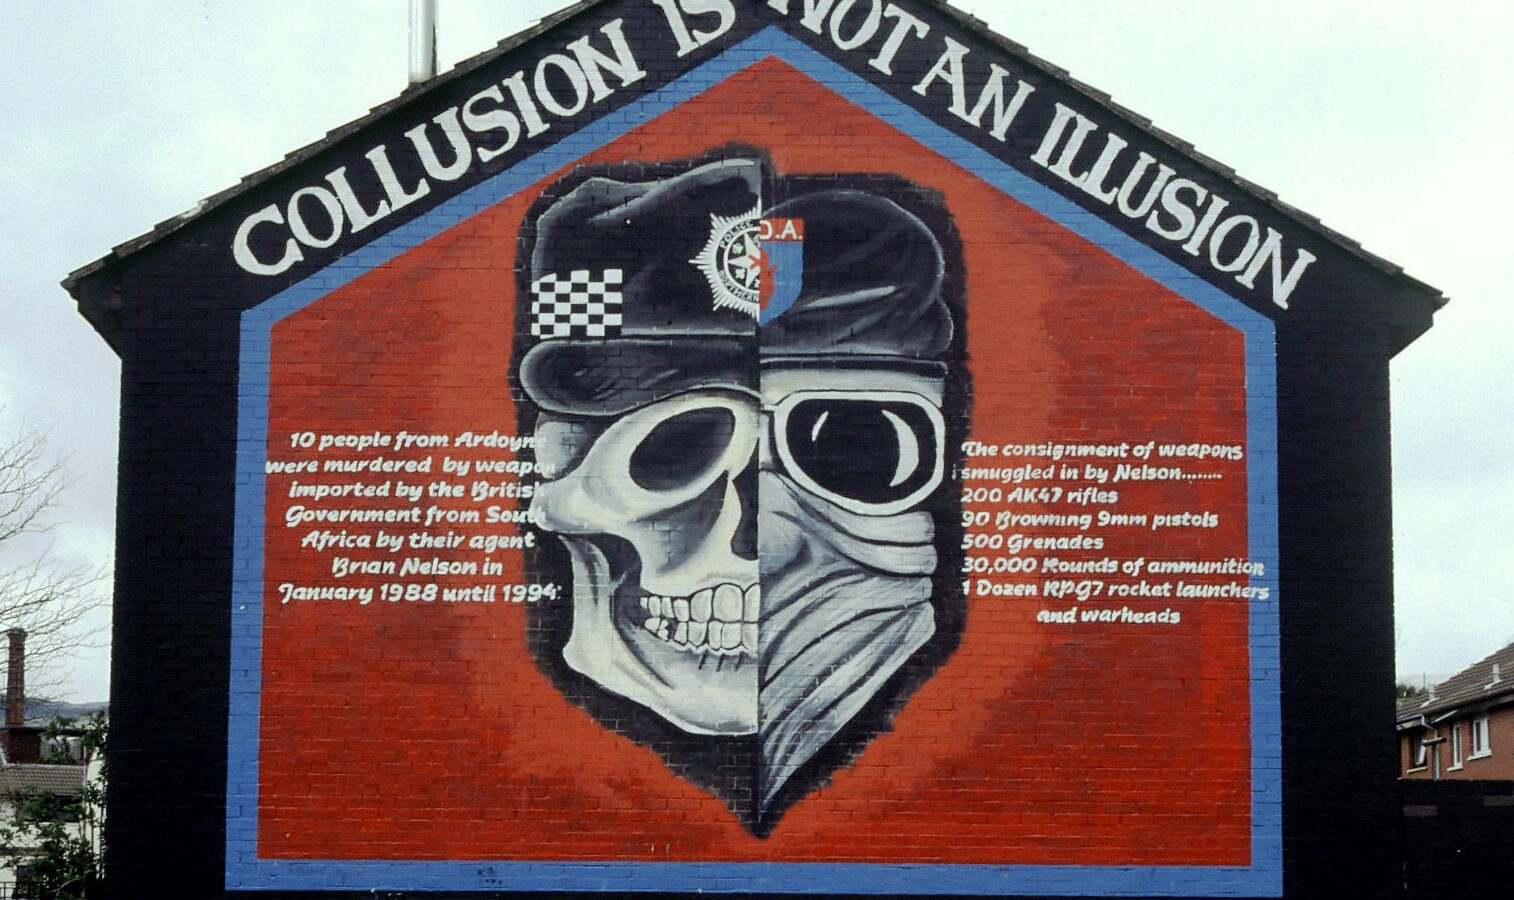 mage Source: Wikimedia, Creative Commons Ardoyne, North Belfast Collusion is not an illusion